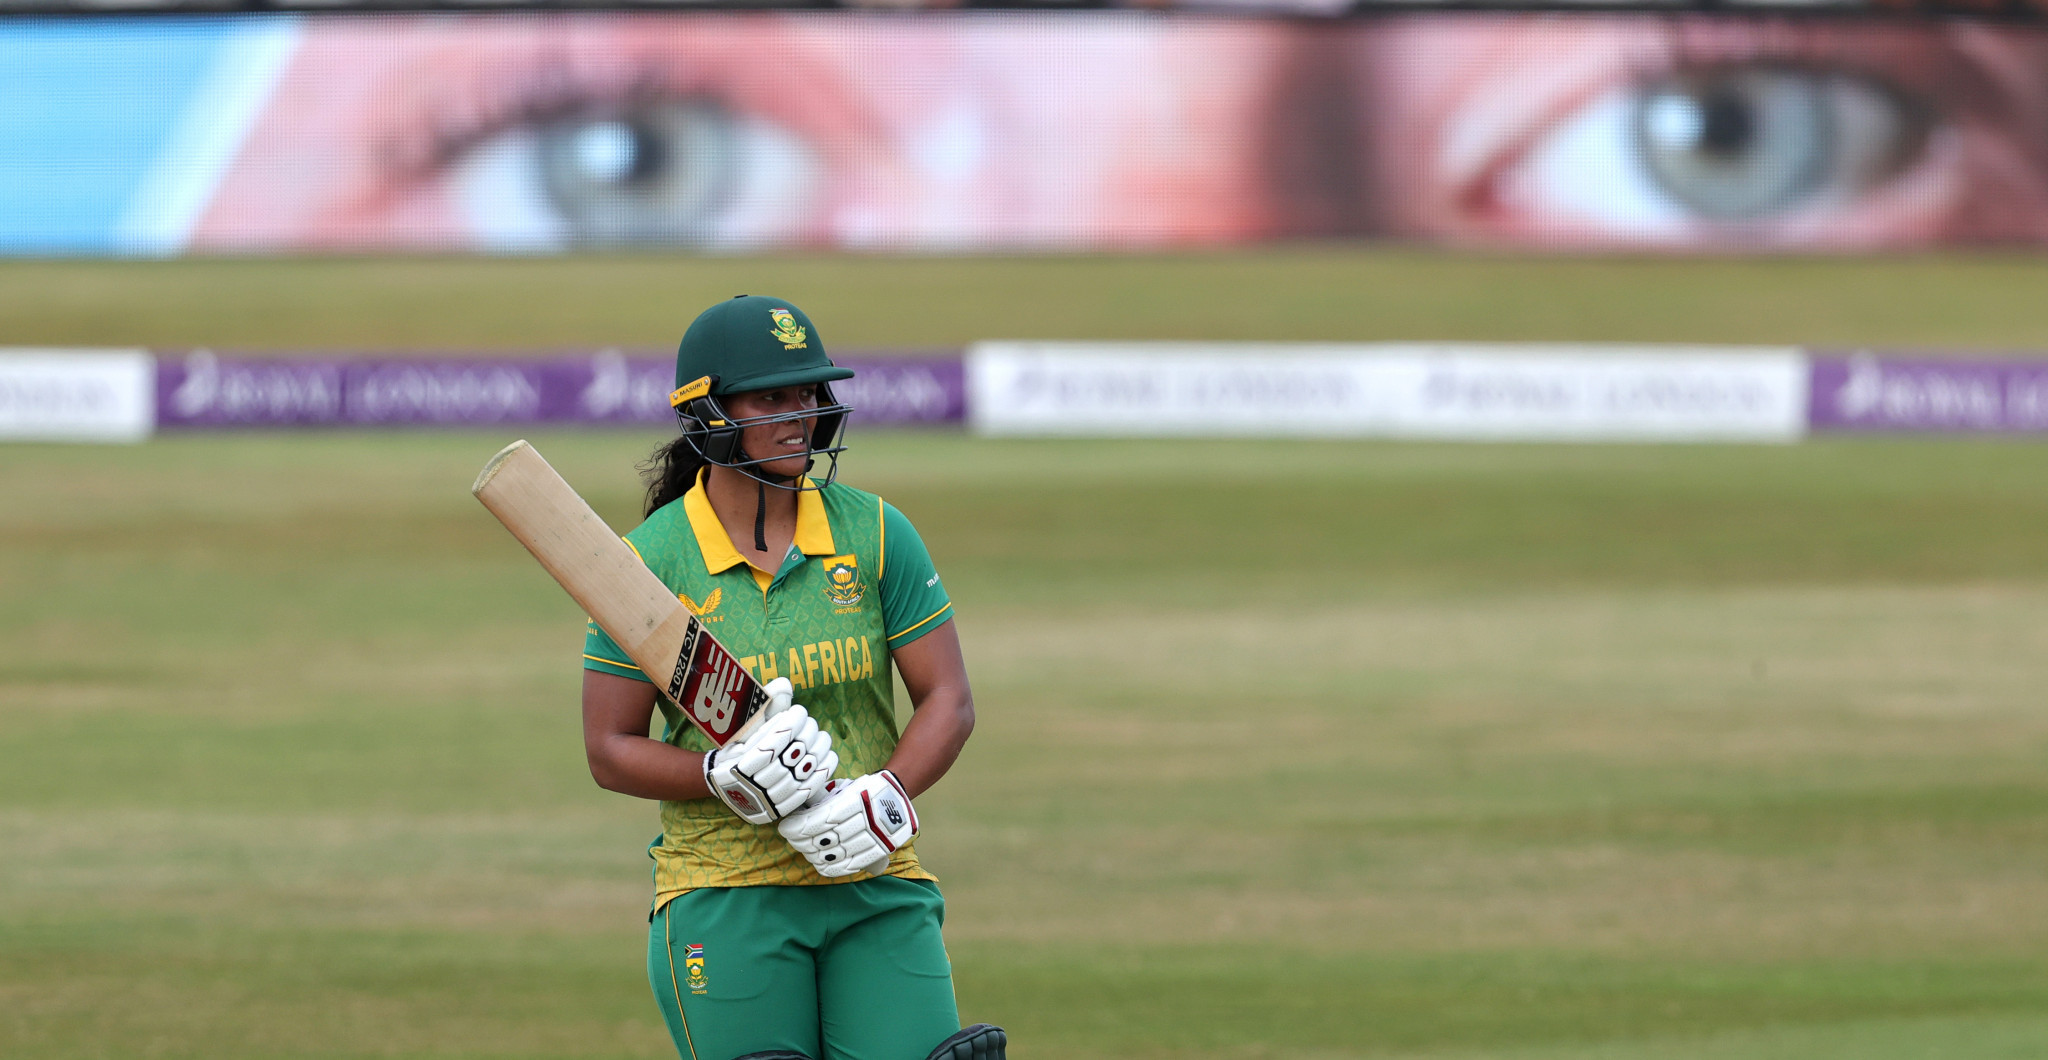 South Africa has big hopes for its women's cricket team who will compete in the inaugural T20 tournament at the Commonwealth Games ©Getty Images